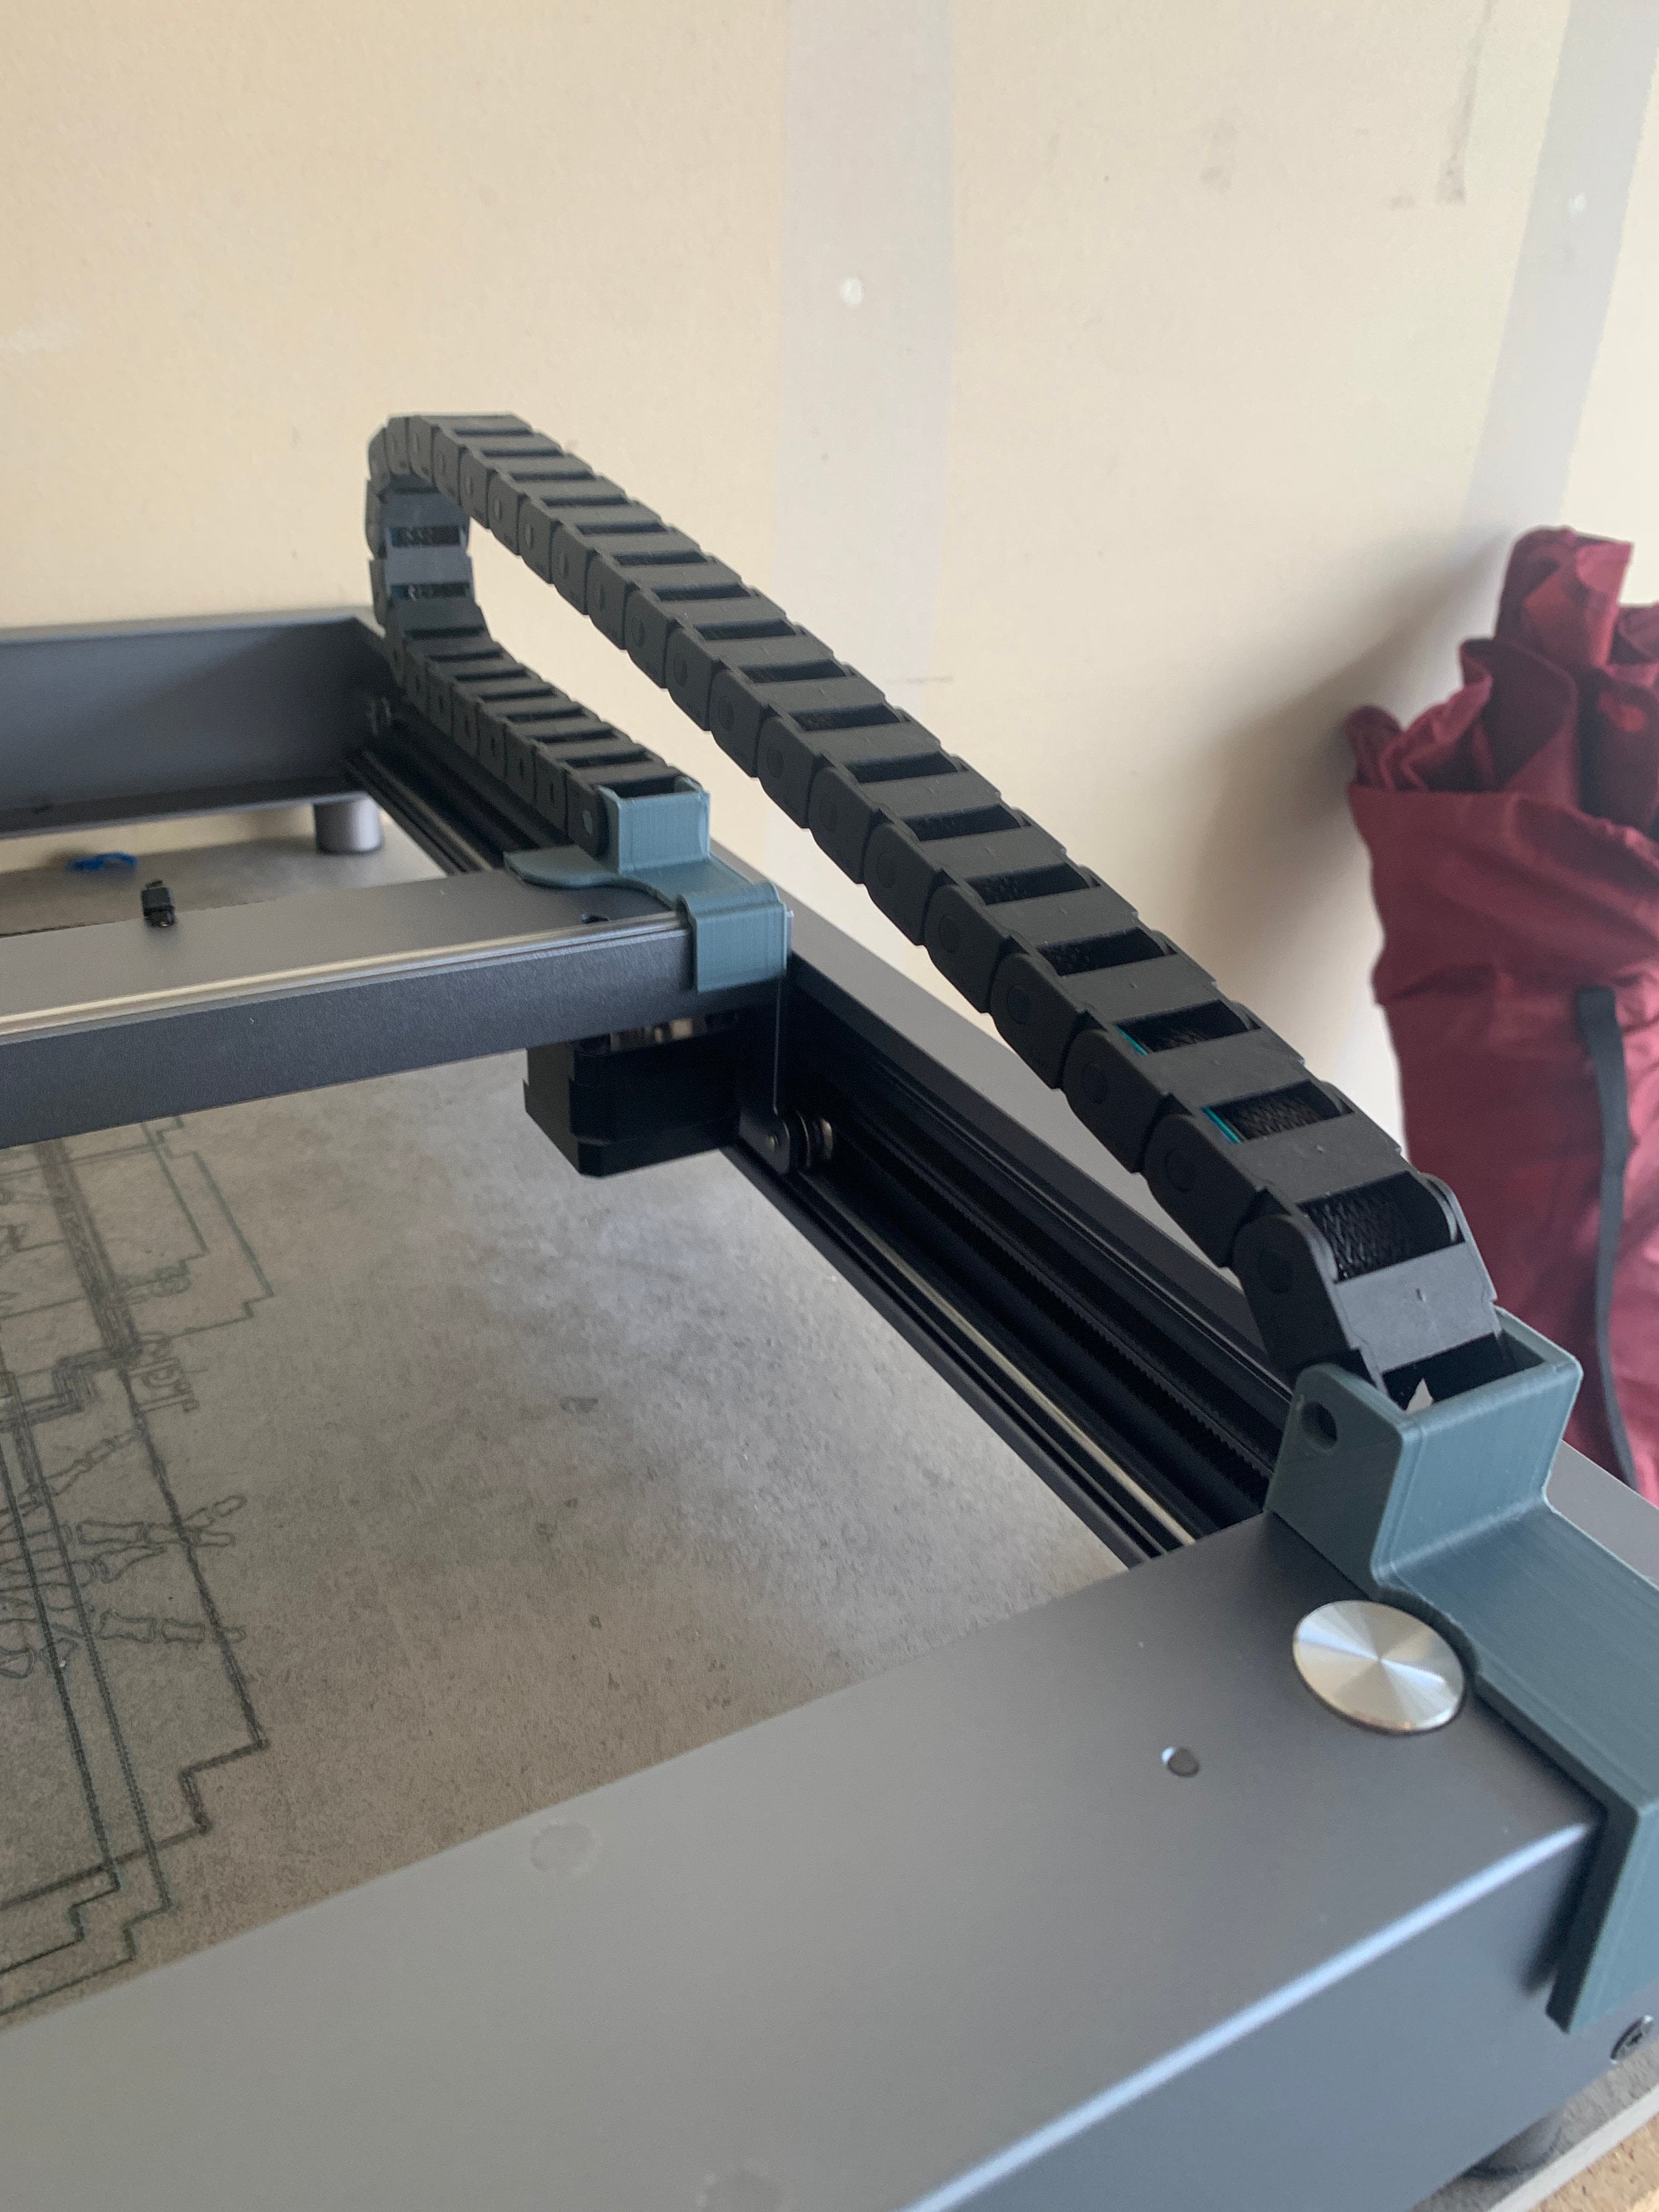 xTool F1 Bundle: Laser Engraver + Accessories – Valley Forge Machines